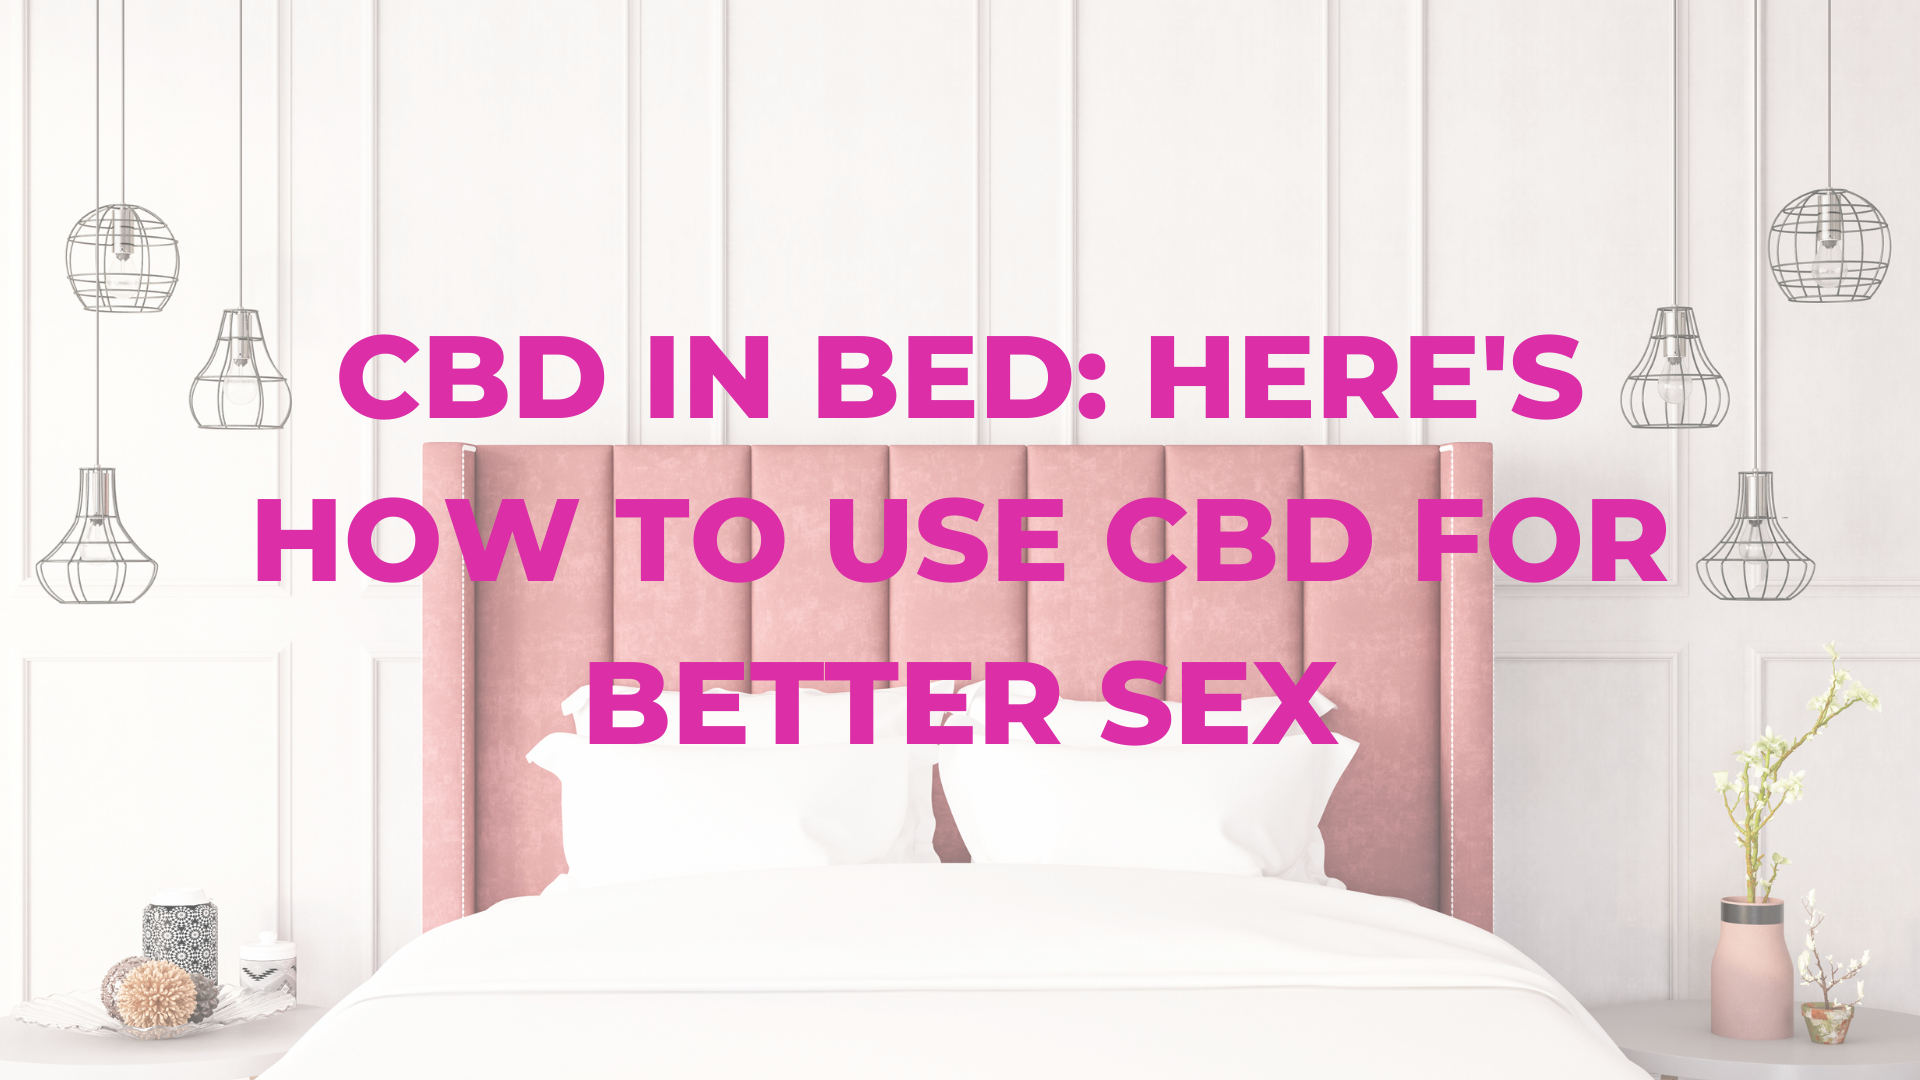 CBD in Bed: Here's How to Use CBD For Better Sex